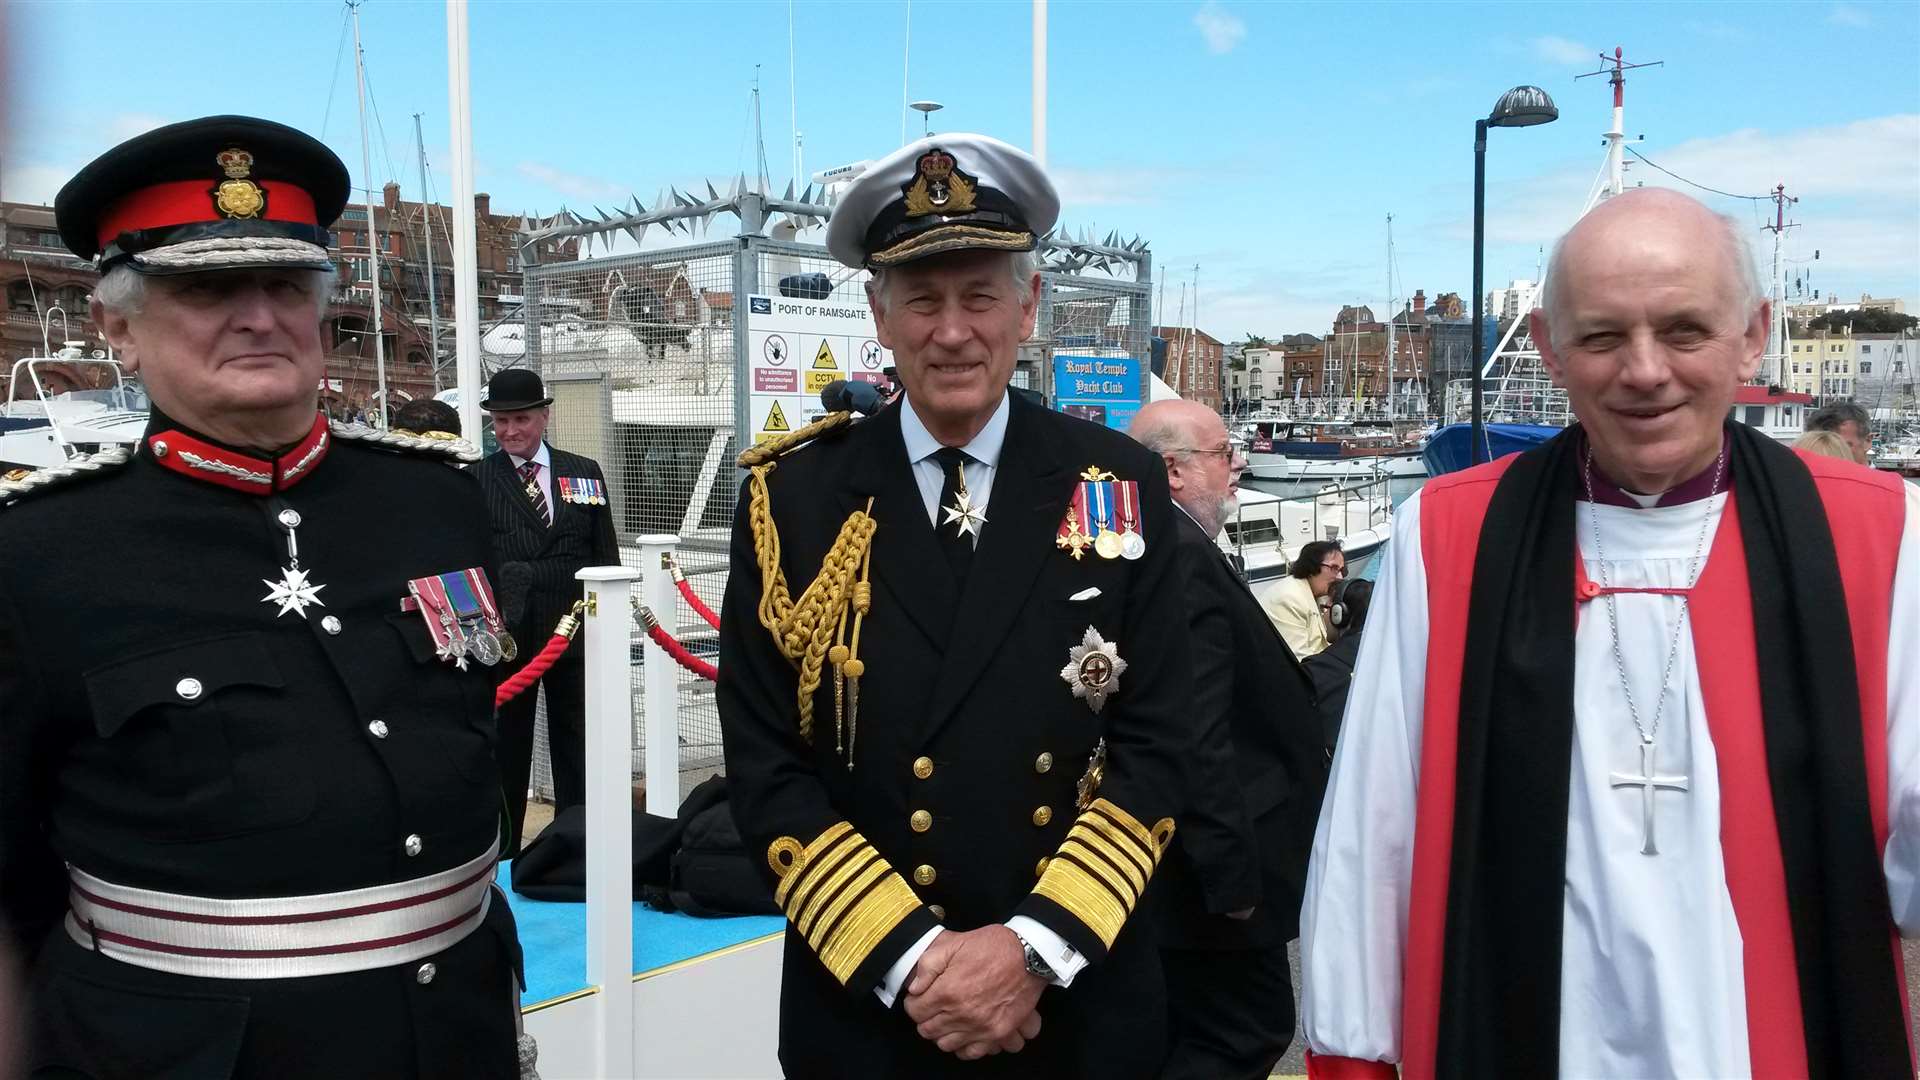 Lord Lieutenant Viscount De L'Isle (left), Lord Warden of the Cinque Ports Michael Boyce (middle) and the Bishop of Dover Trevor Willmott (right).